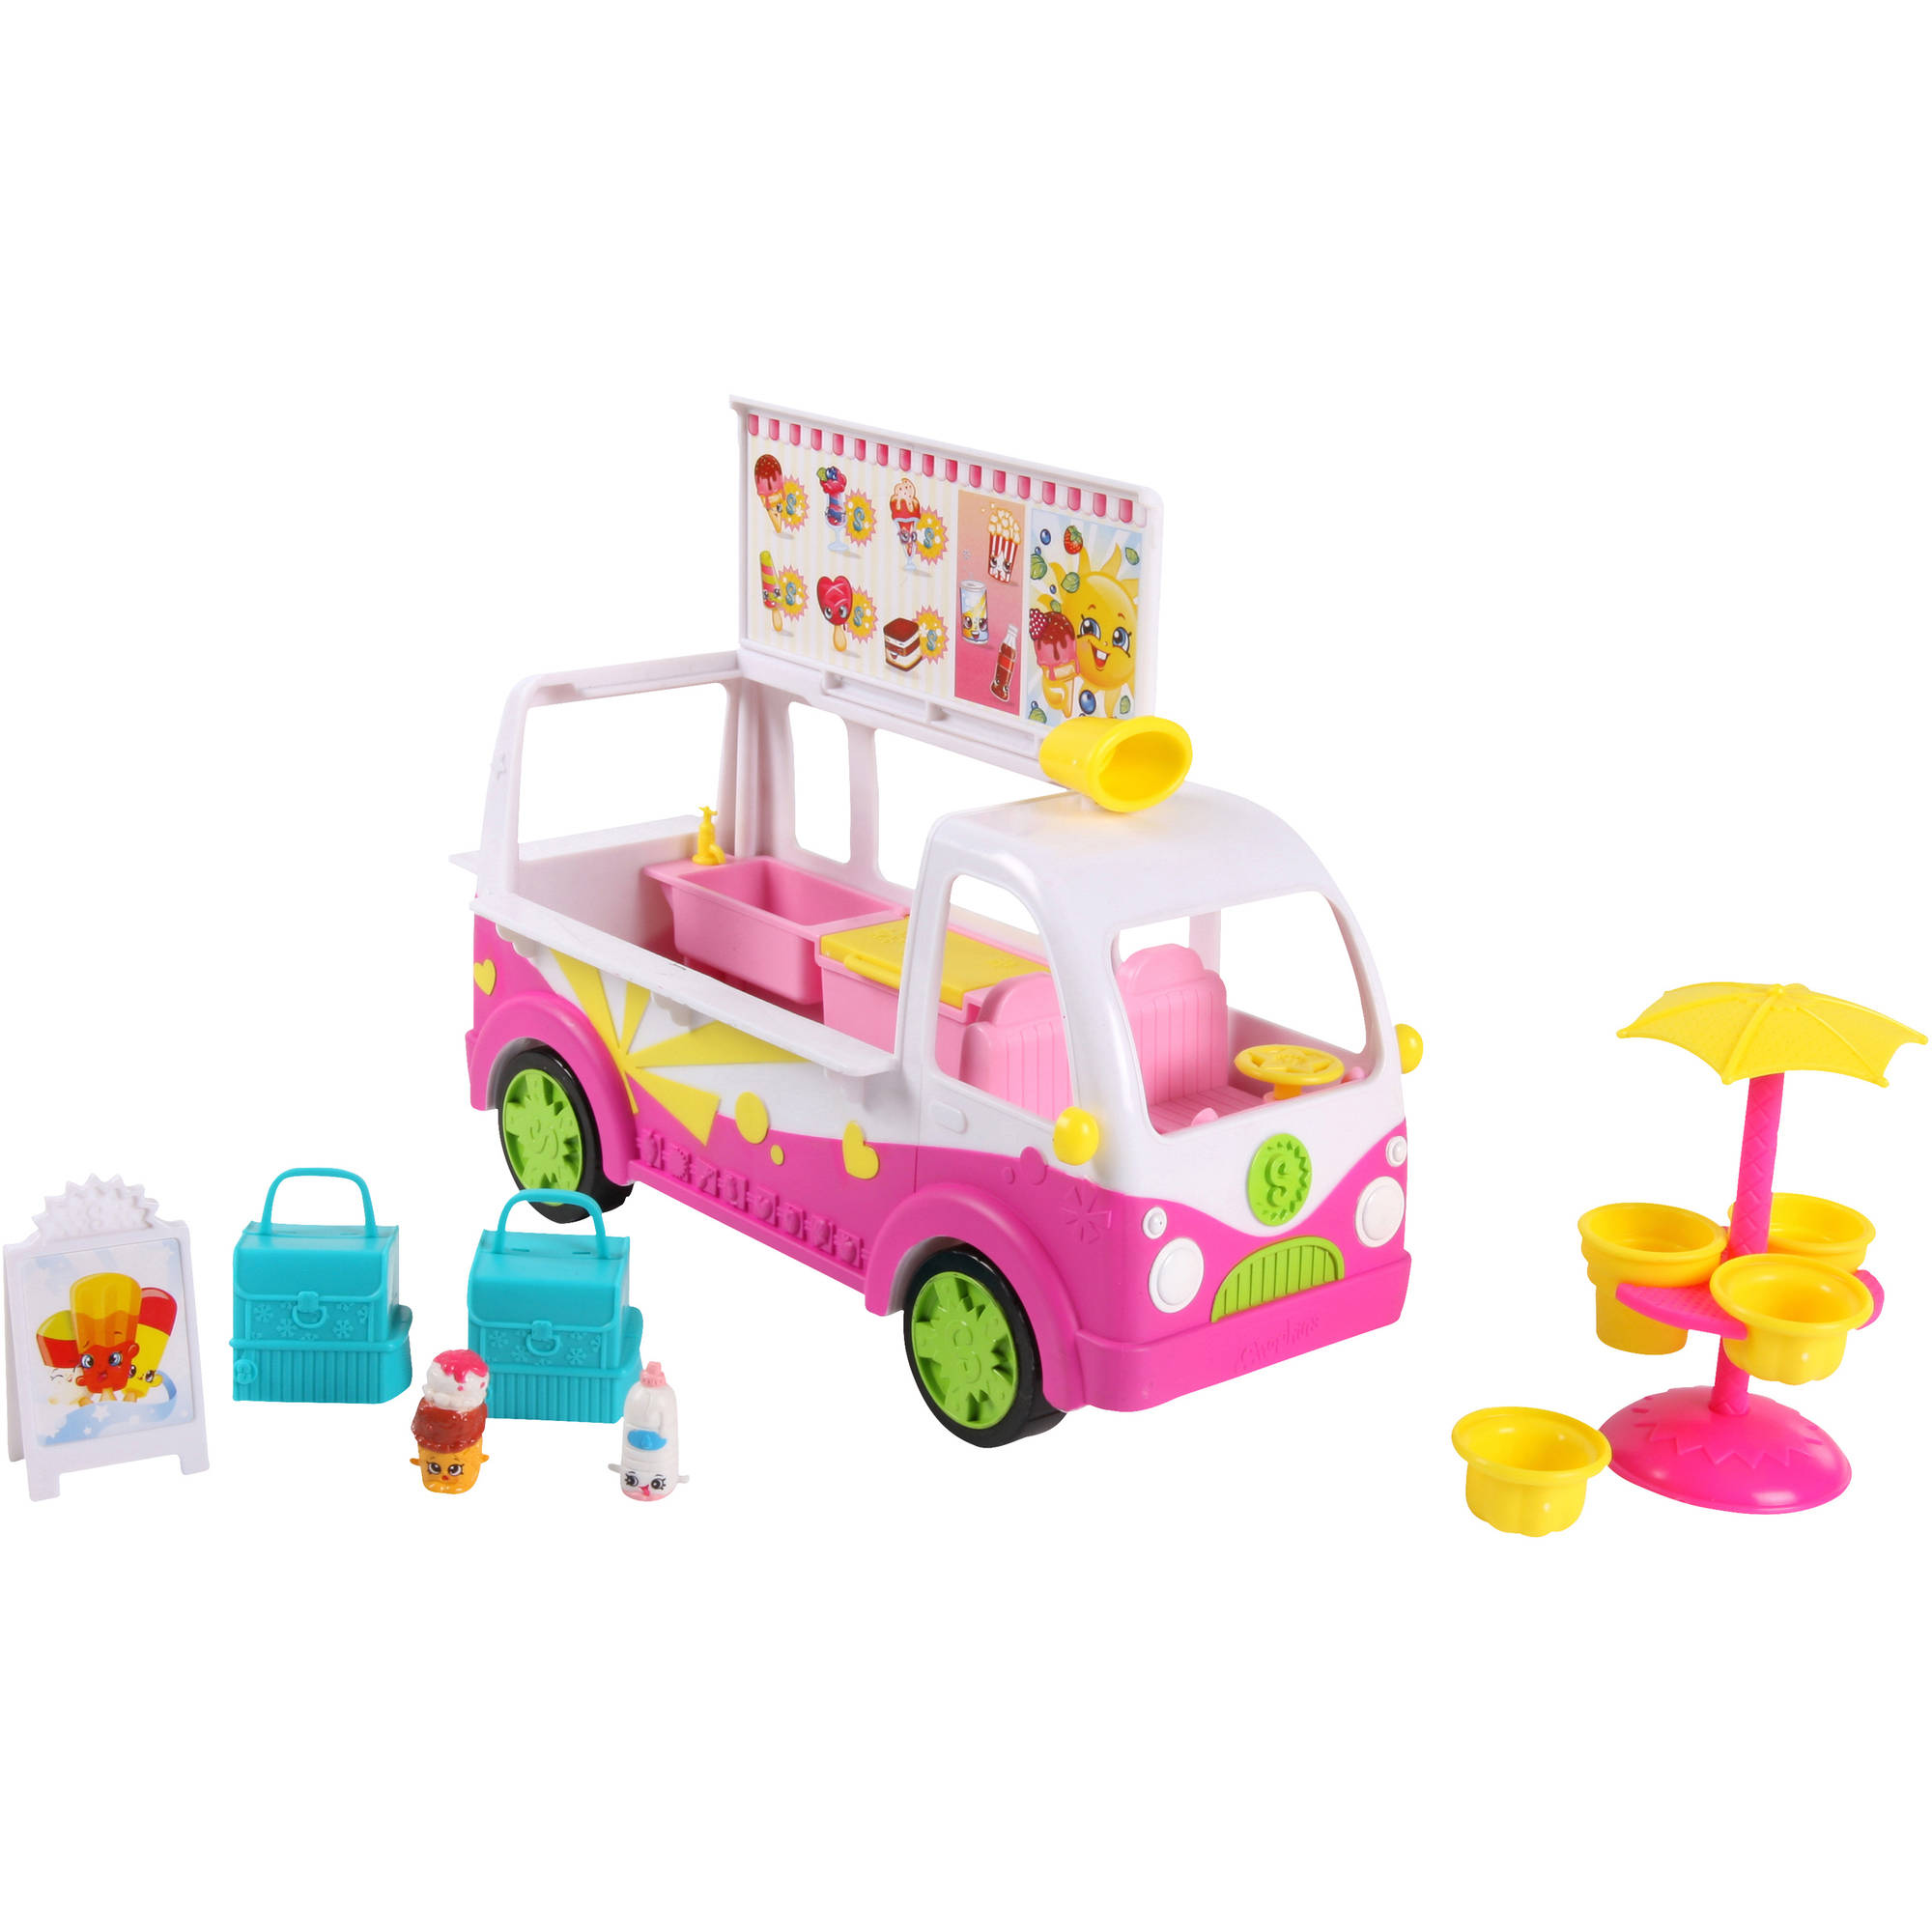 Shopkins Scoops Ice Cream Truck Playset - image 1 of 3